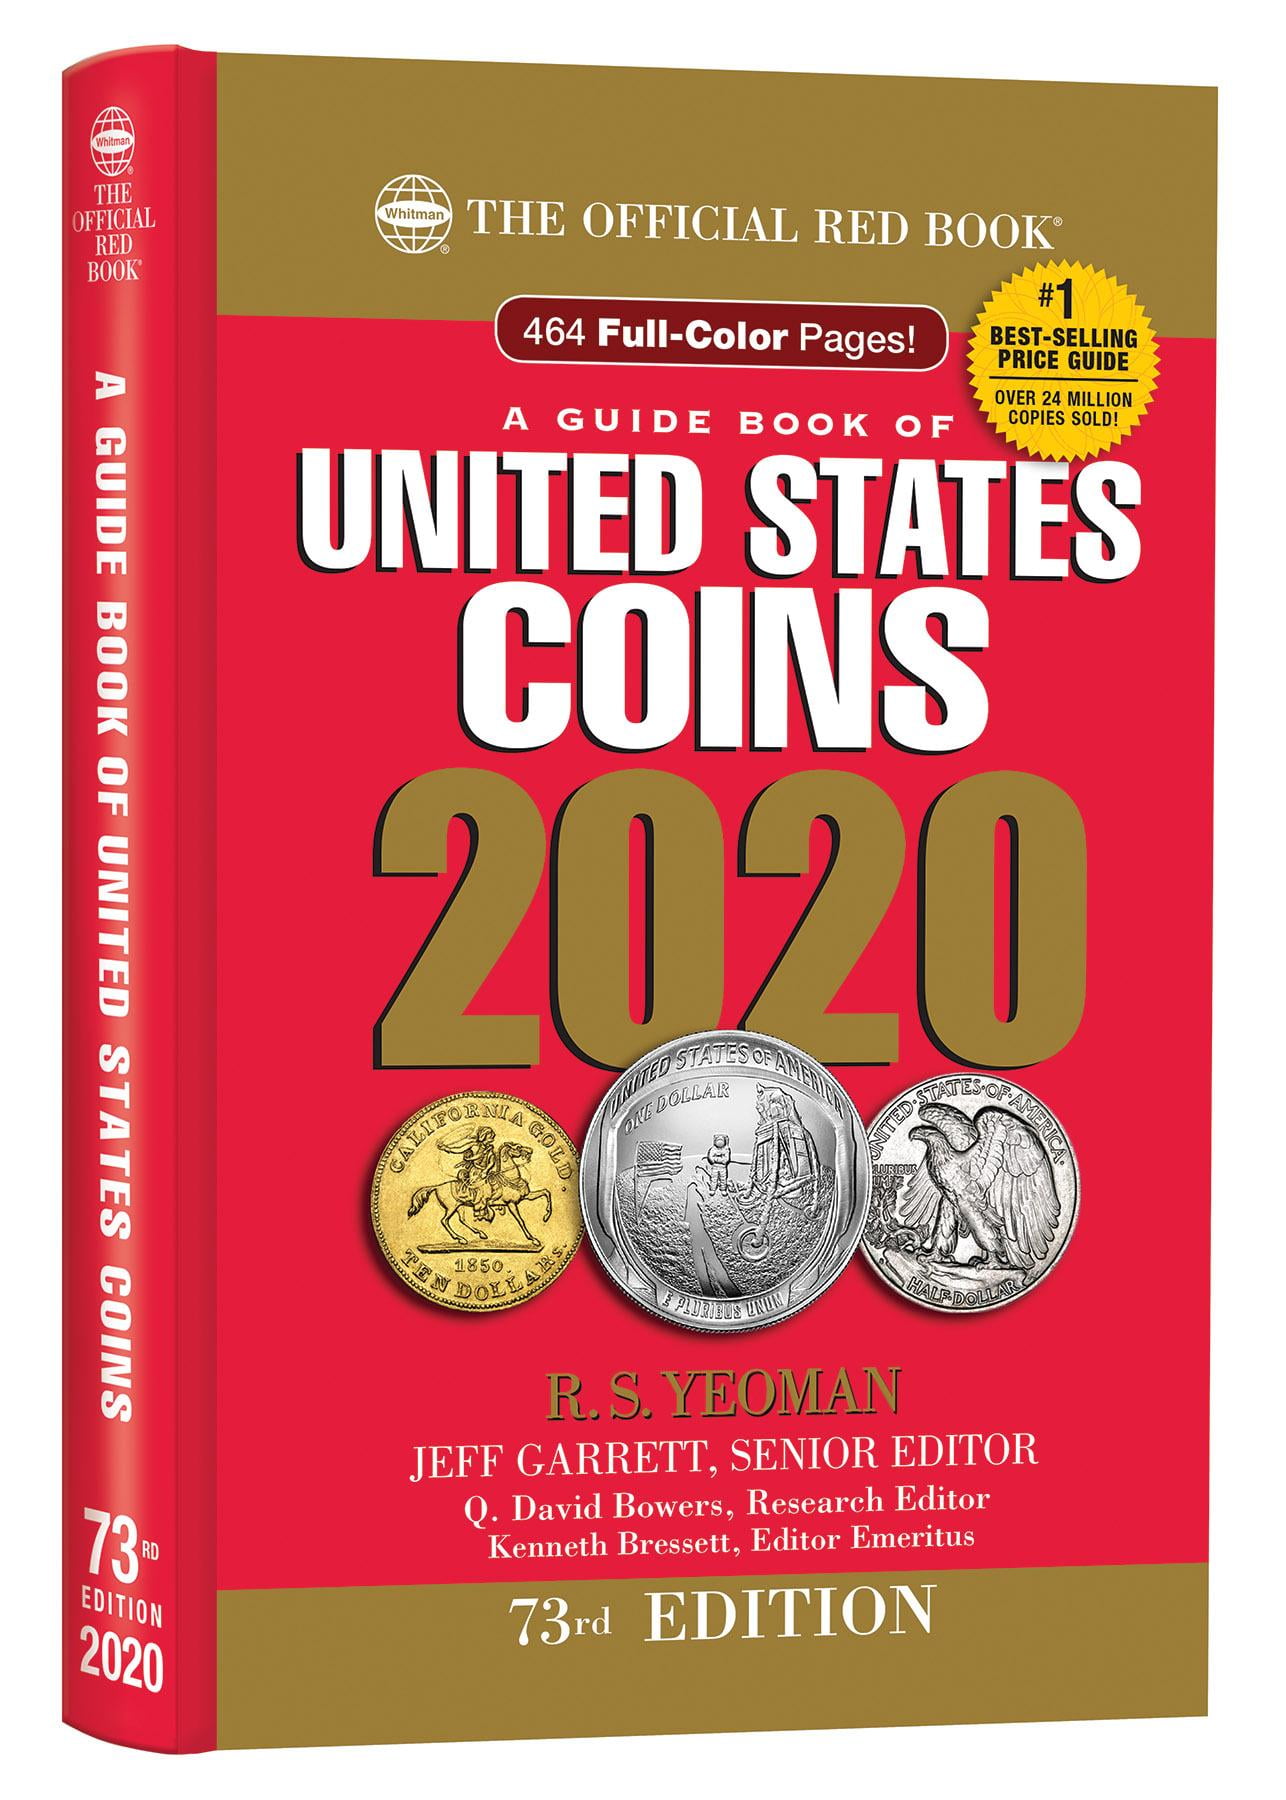 A Guide Book of United States Coins Hidden Spiral 2020 73rd Edition